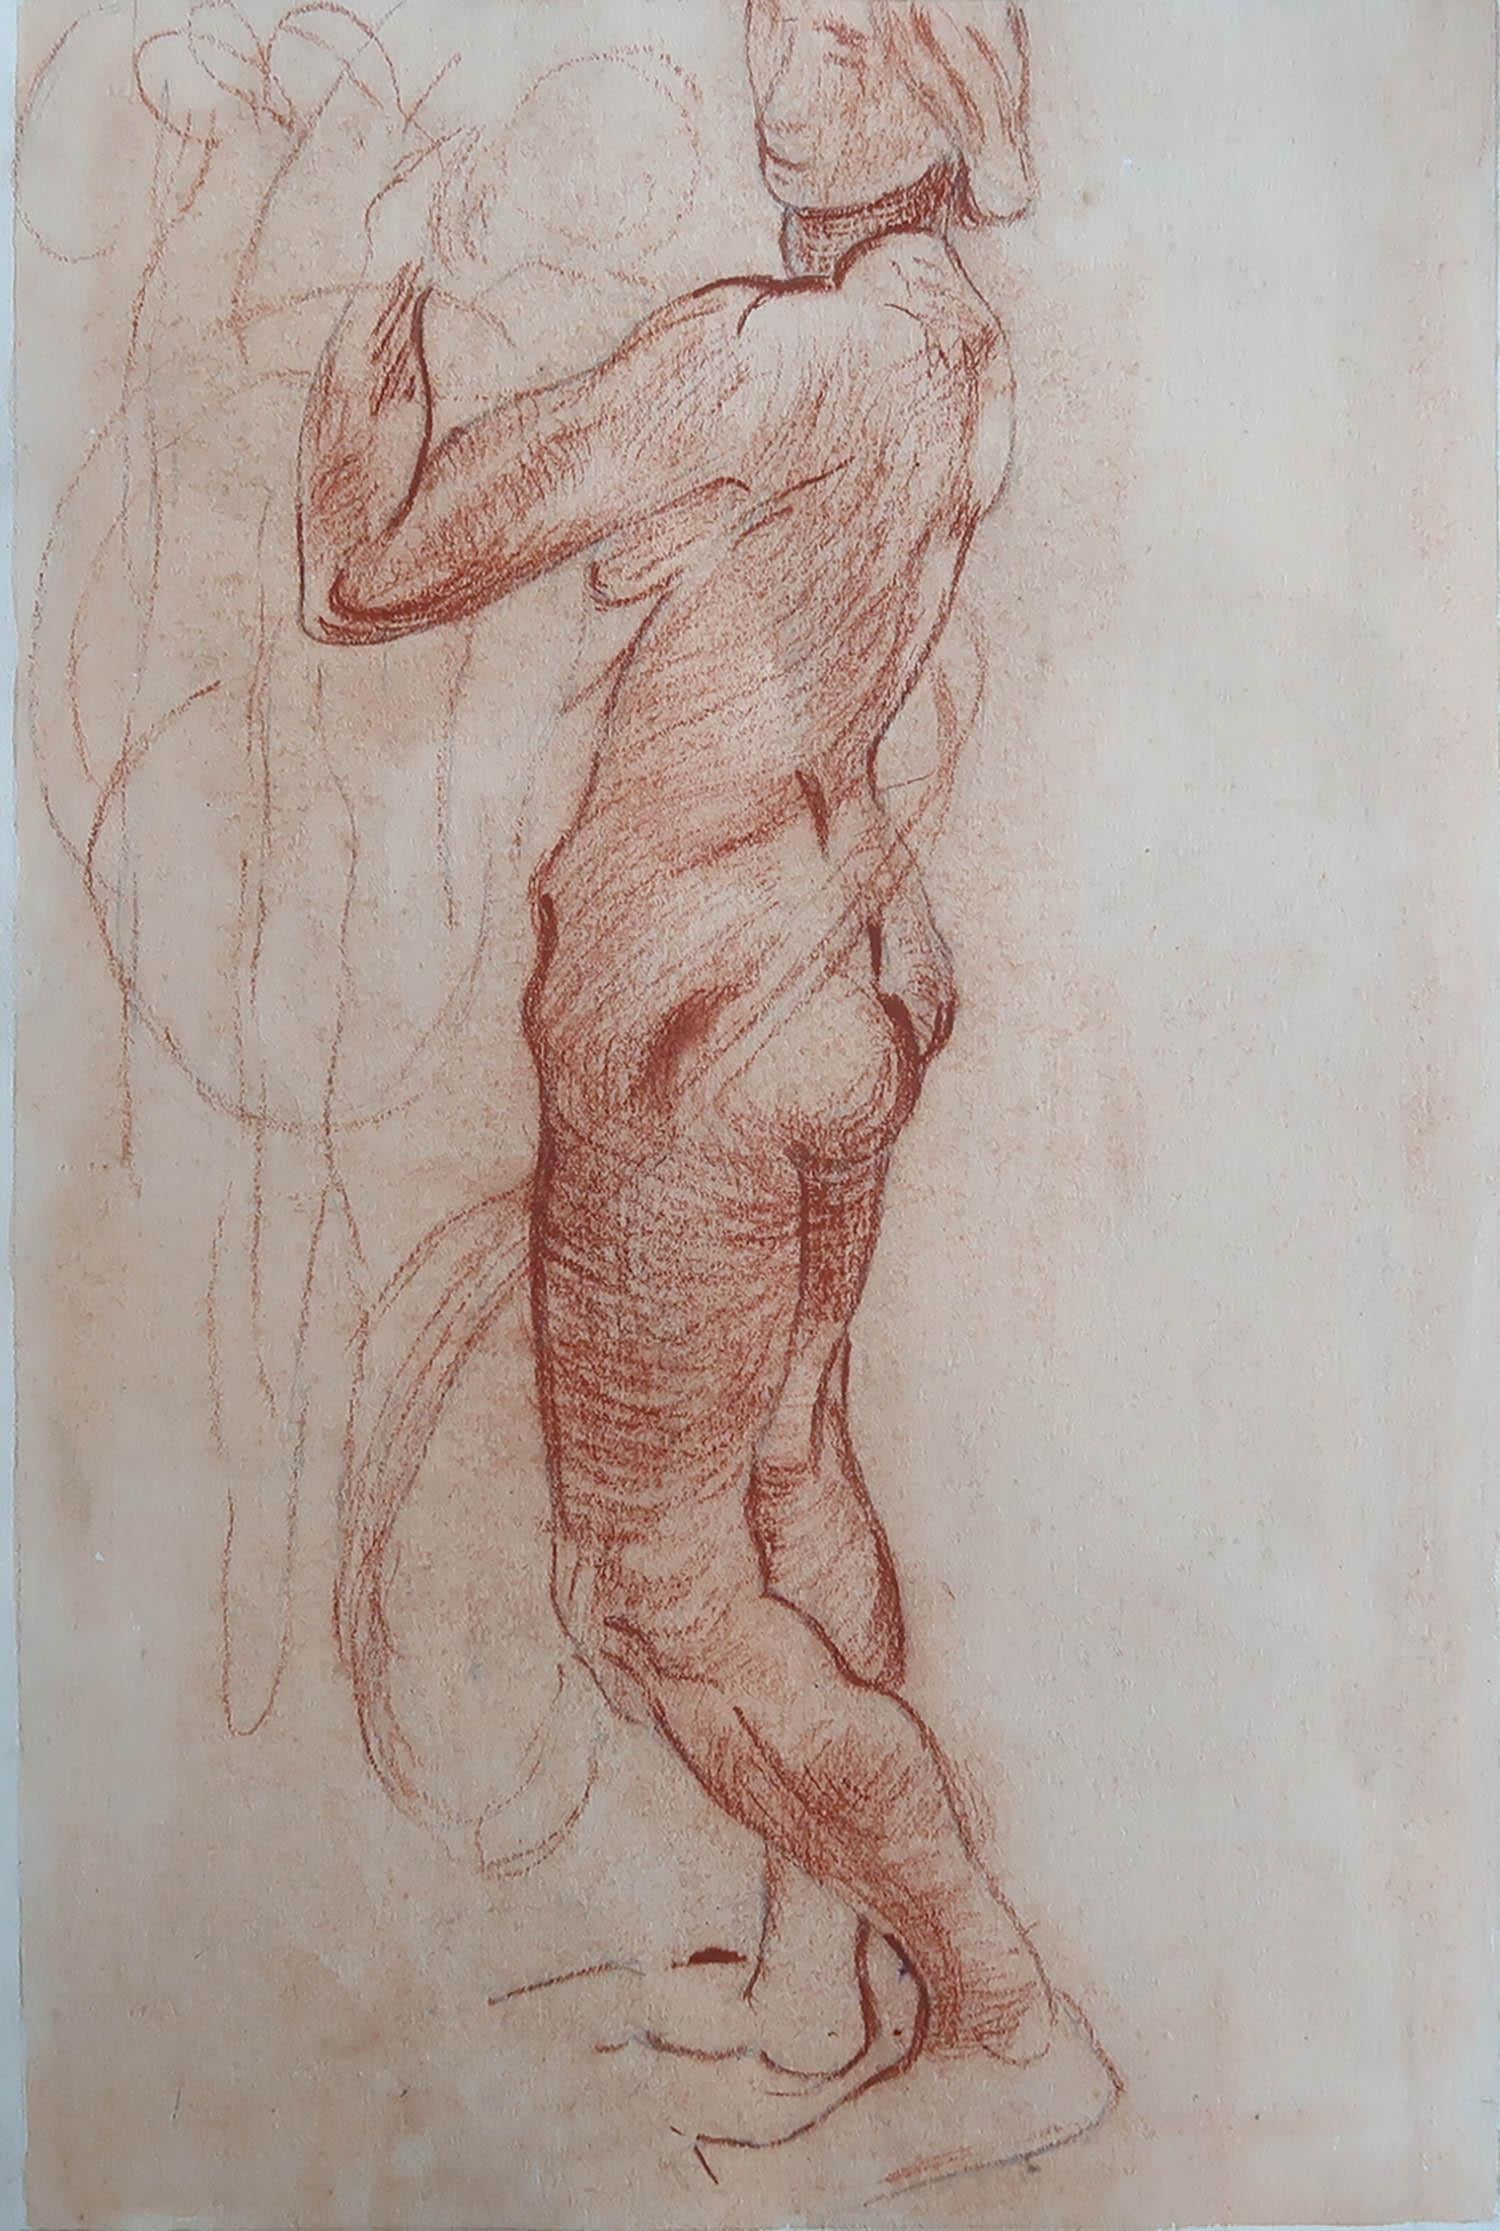 Bleached Red Chalk Drawing of A Female Nude. English, Late 19th Century